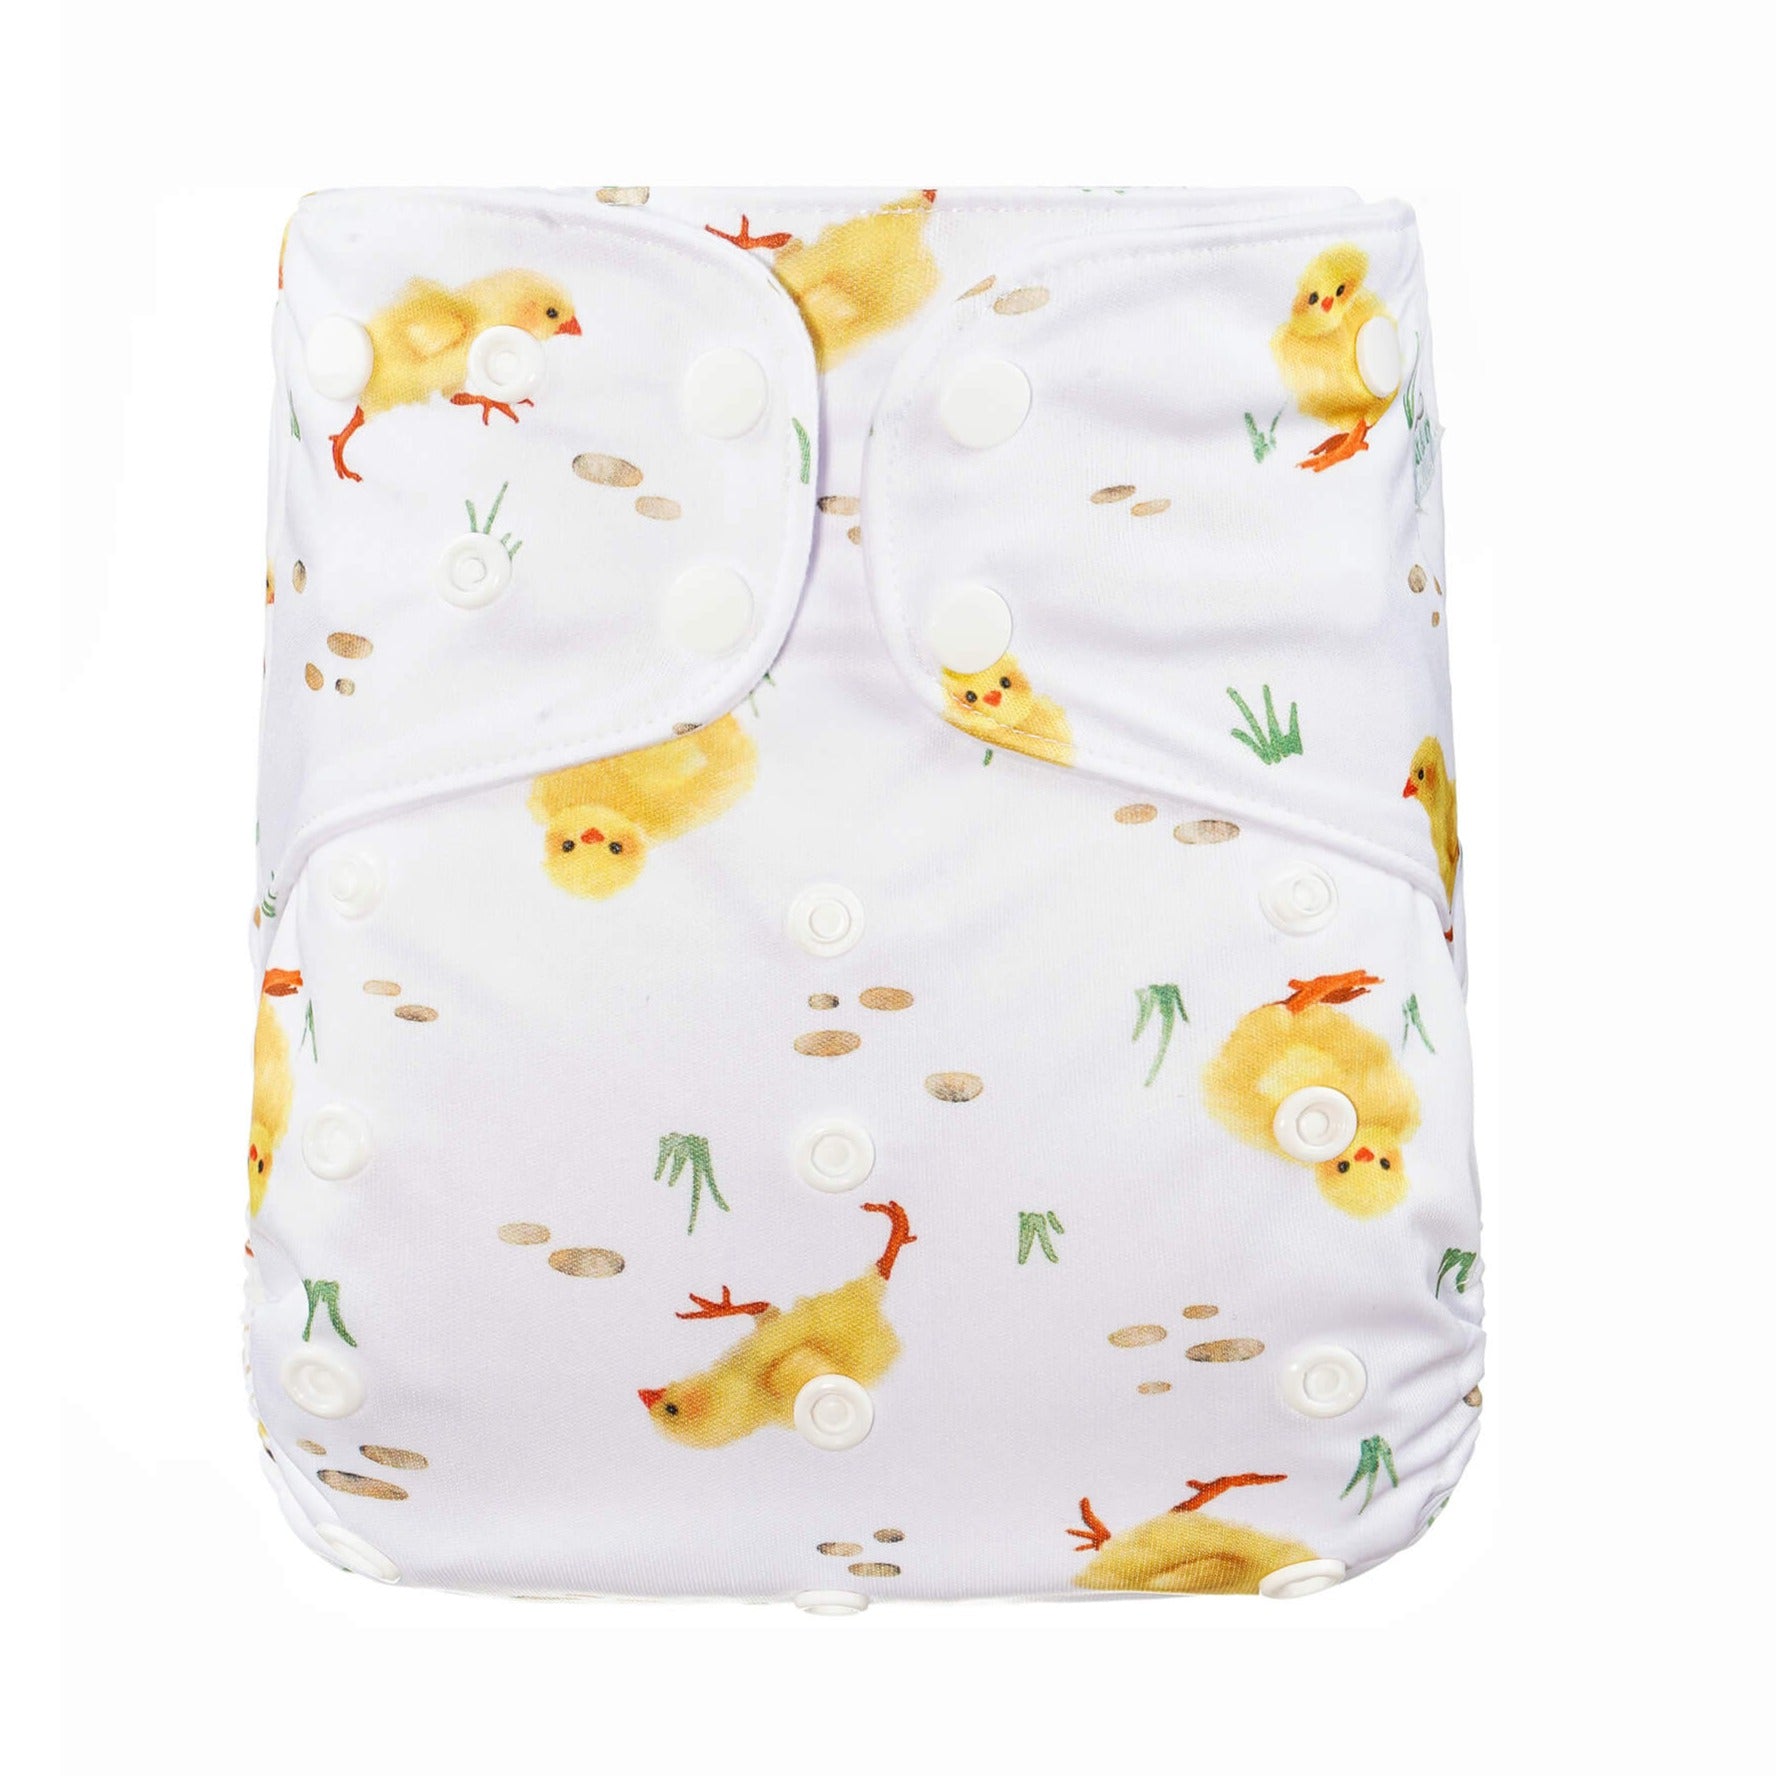 Bear & Moo Reusable Cloth Nappy in Little Chicks print